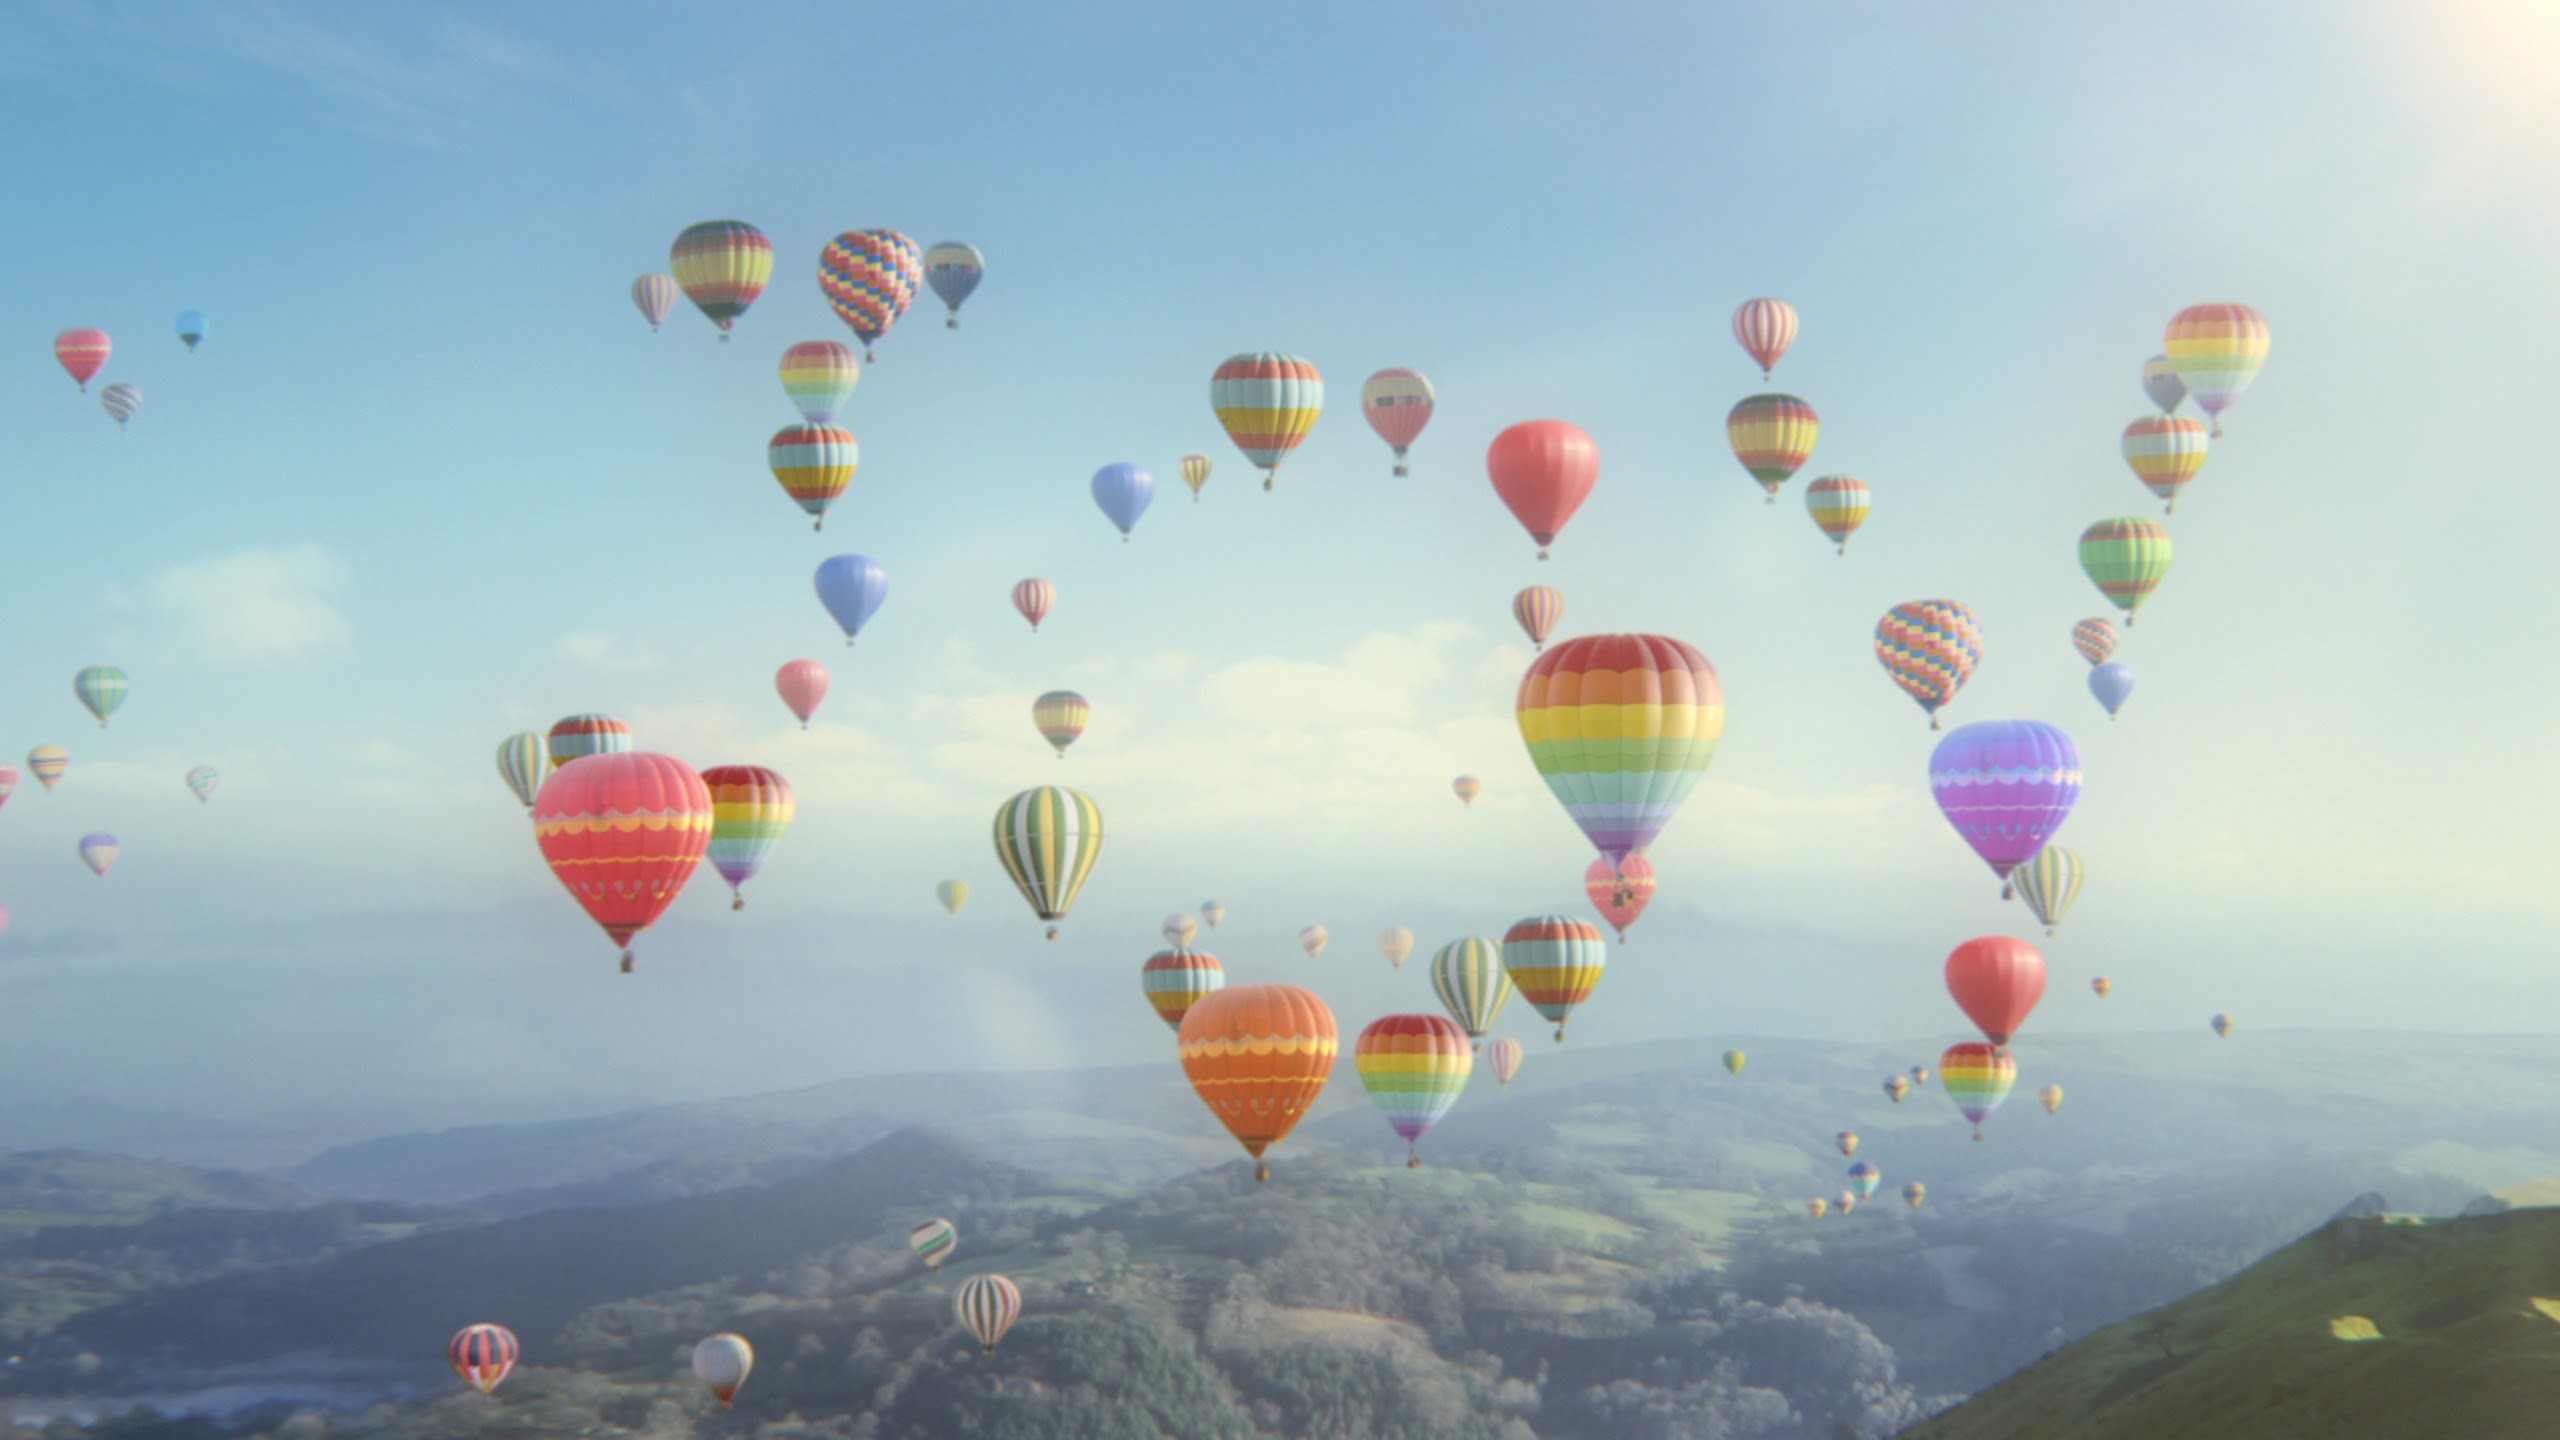 Hot air balloons spell out the word joy